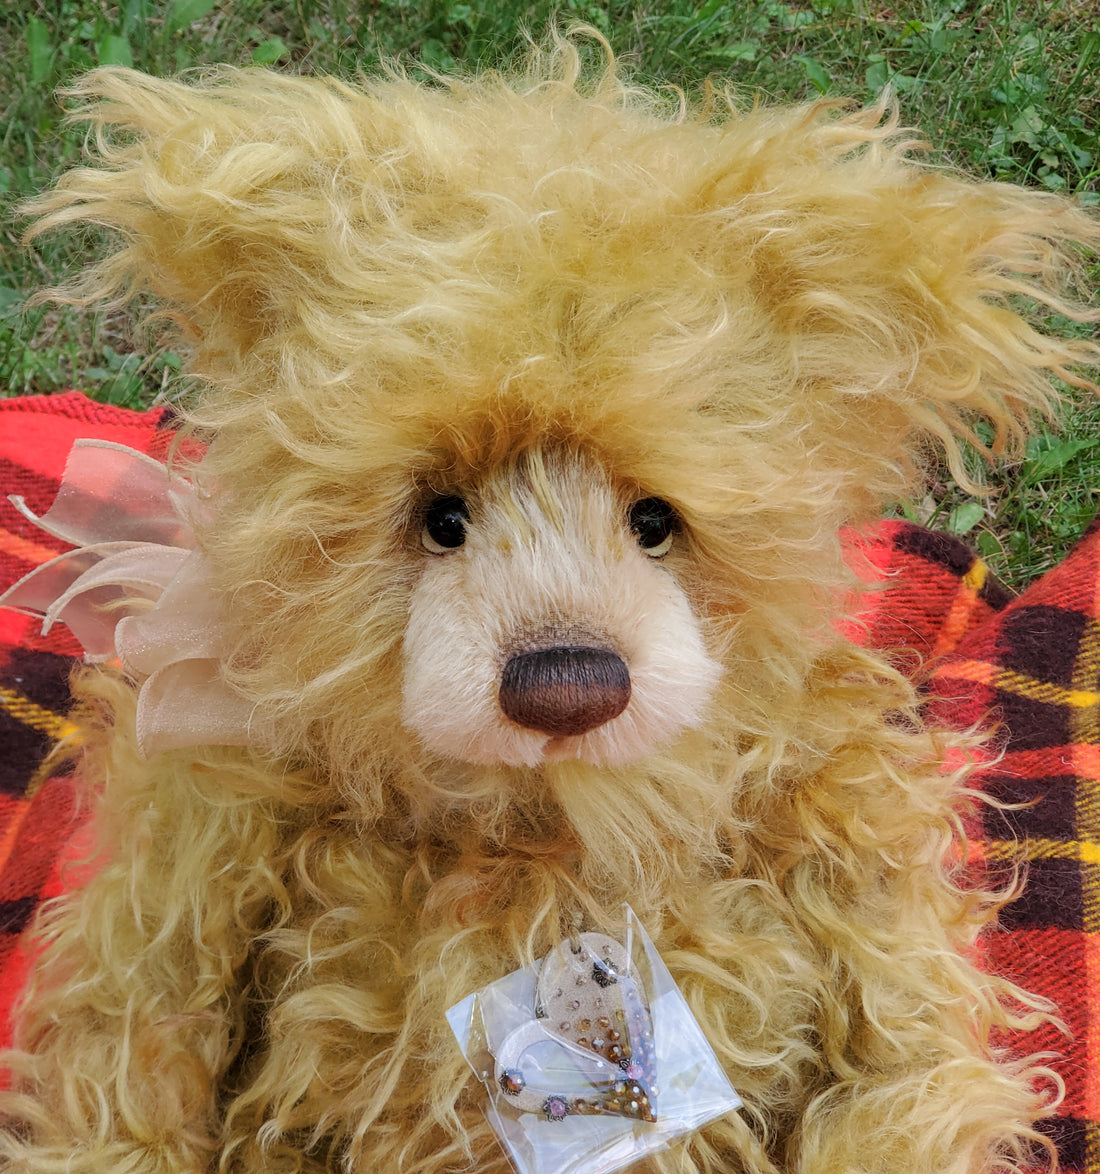 Milne - 20" Wavy Mohair Limited Edition Bear from Isabelle Collection